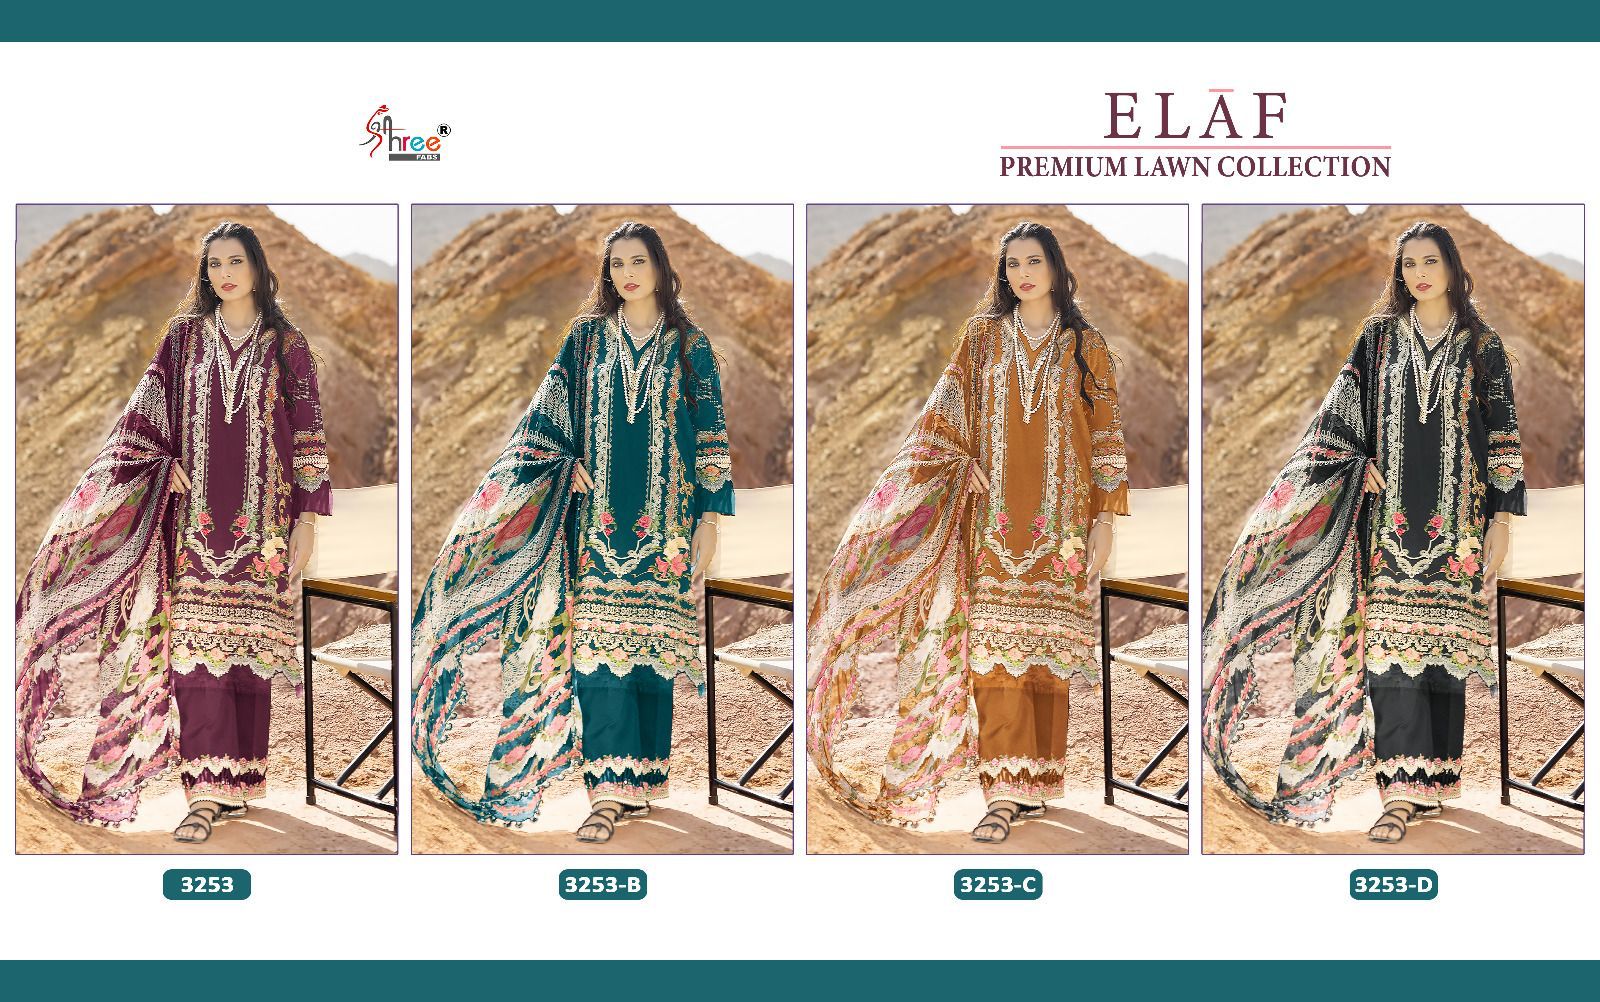 Shree Elaf Premium Lawn Collection collection 4